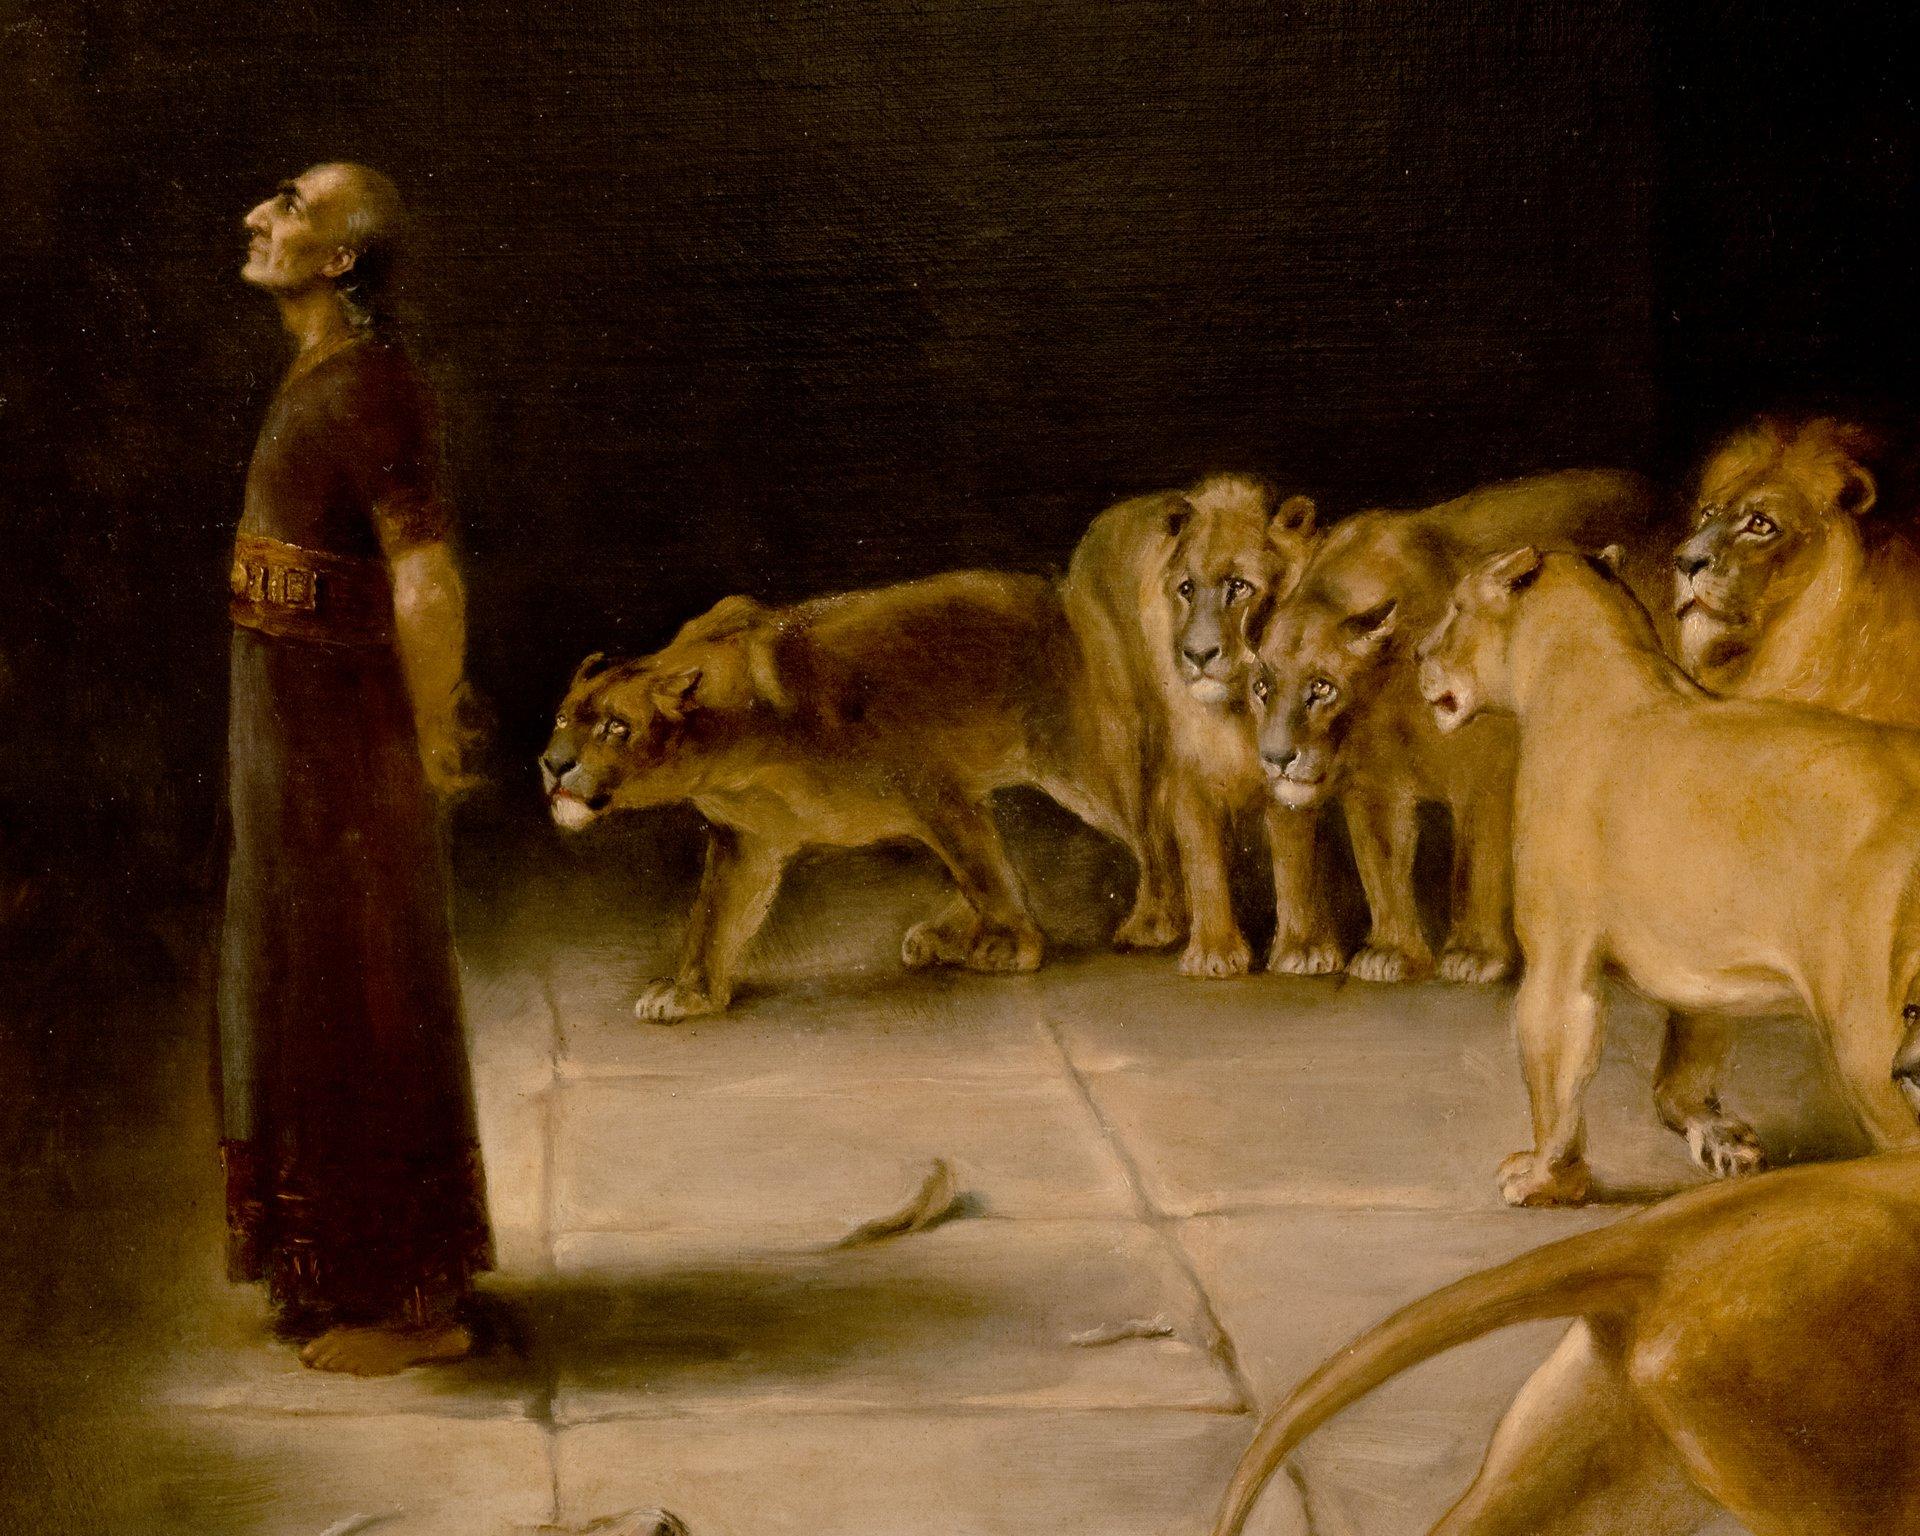 Henry Ossawa Tanner Figurative Painting - DANIEL IN THE LIONS' DEN BY HENRY OSSAWA TANNER after Briton Riviere